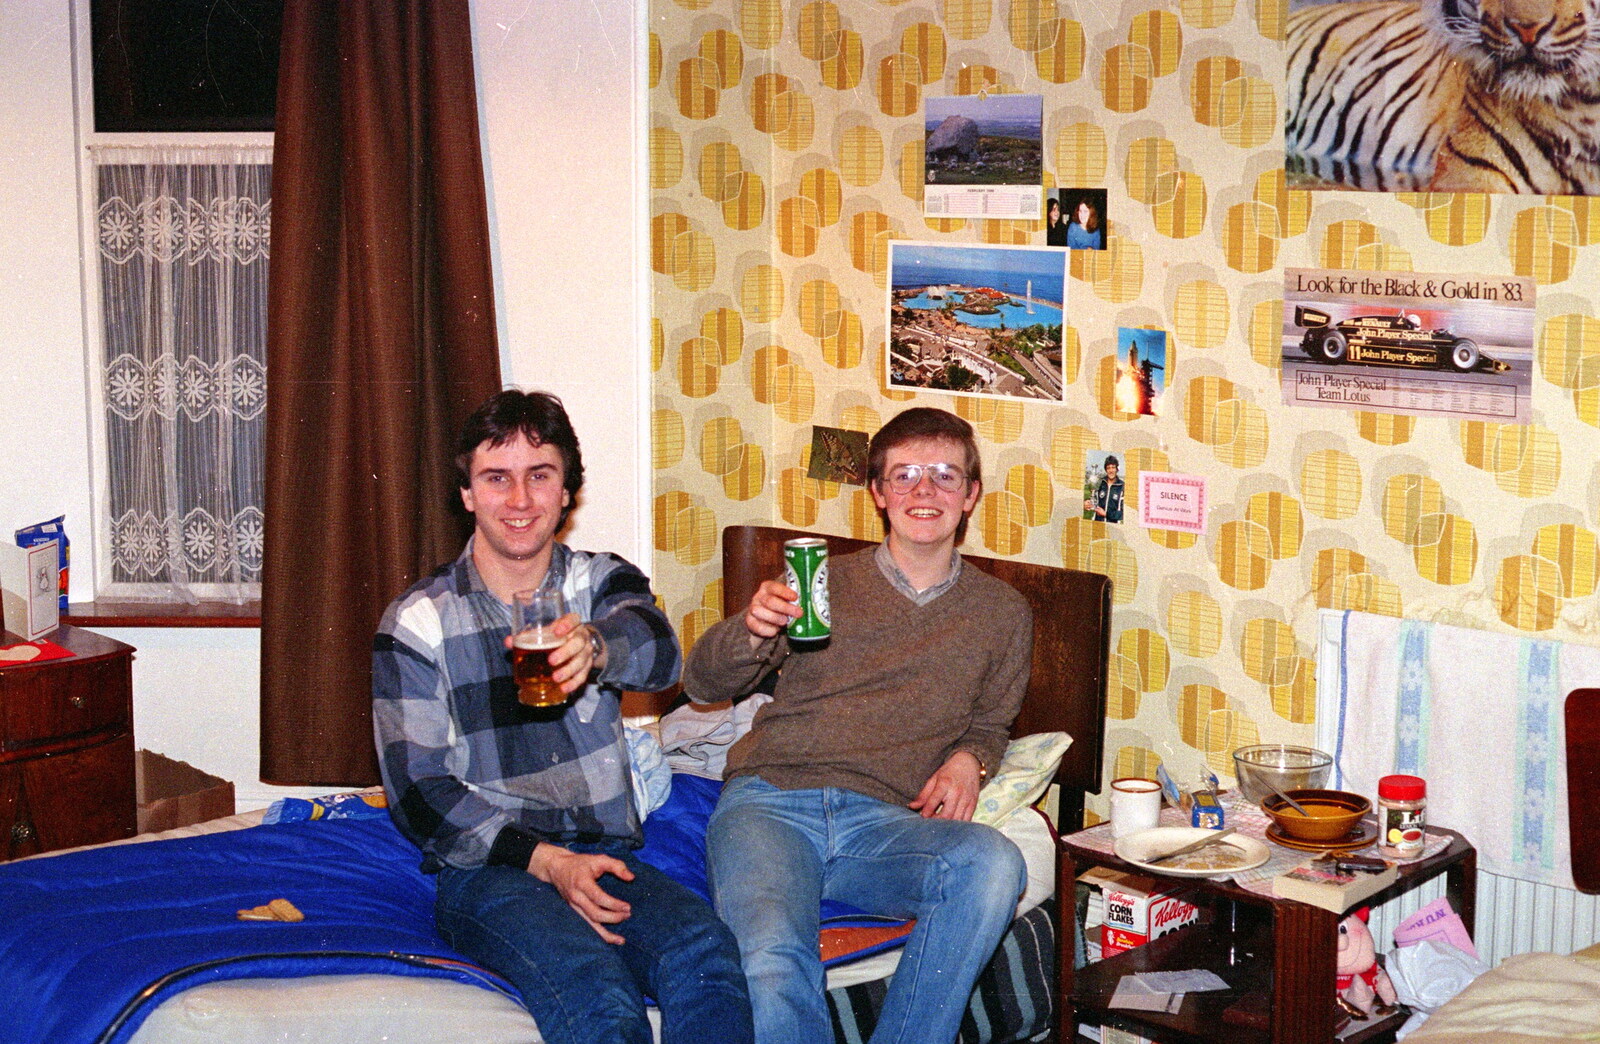 Riki and Dave Lock in their Sutherland Road bedsit from Uni: RAG Week Abseil, Hitch Hike, and Beaumont Street Life Plymouth, Devon - 13th February 1986